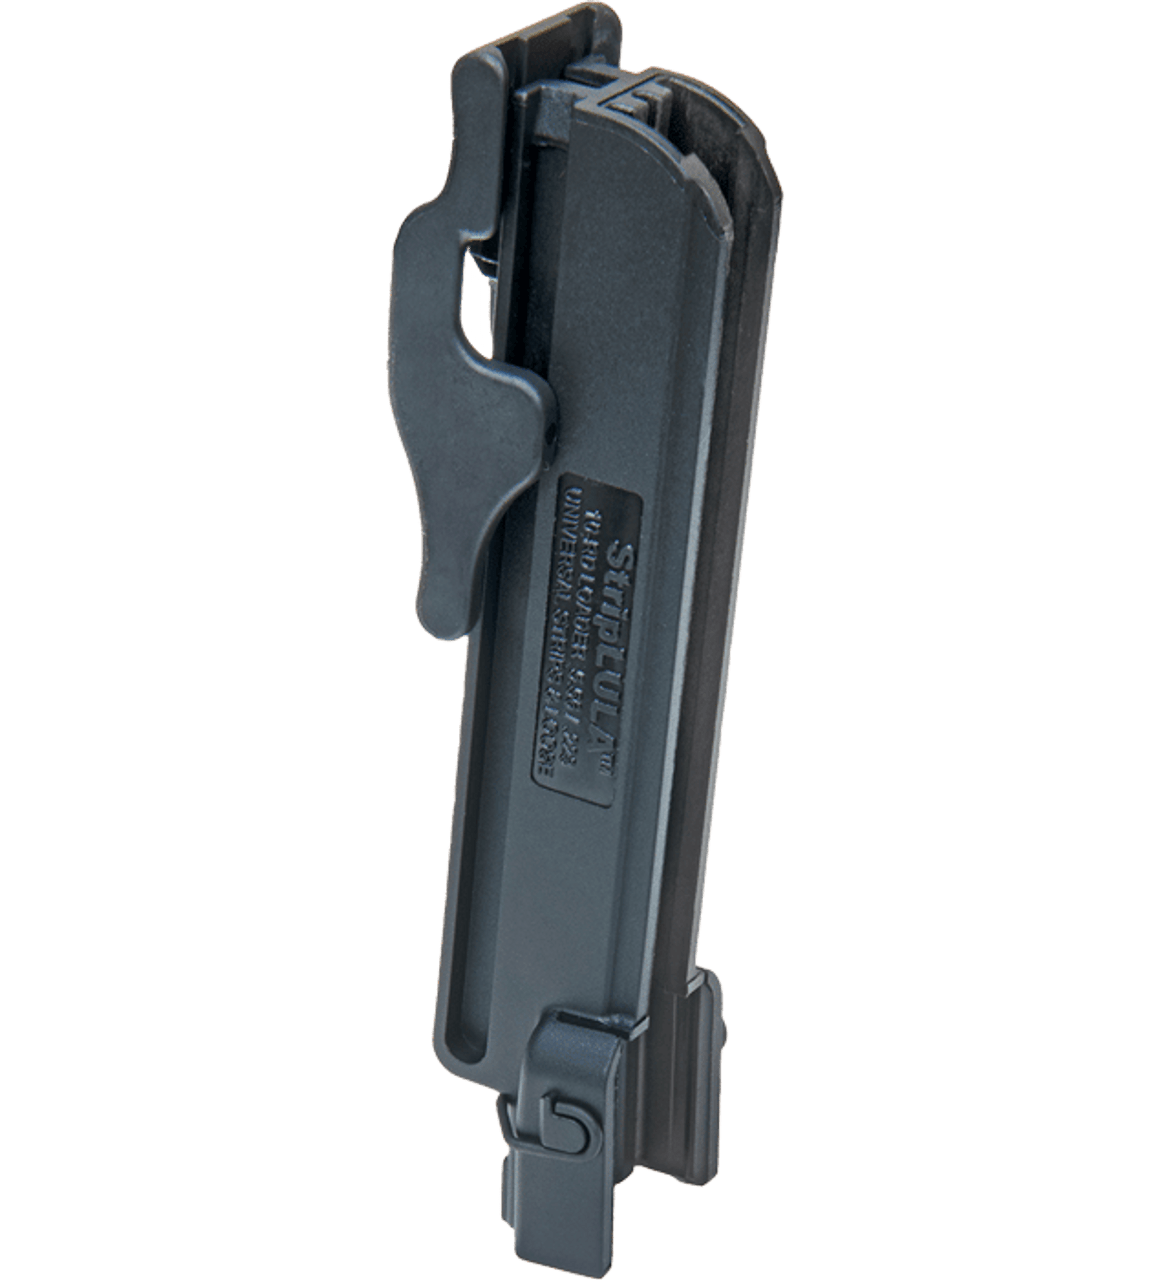 M4 / AR15 10-round universal StripLULA® loader for all 5.56 / .223 metal & polymer stripper-clips and magazines, including PMAG’s and Lancer.

 

Gen. II universal StripLULA® loader. (load rounds also from GECO (RUAG) gray stripper-clips)
Loads both 10-rd stripper-clips and 10 loose rounds.
A simple unloader.
Small & durable.
Fits all M-16 / AR-15 5.56mm type metal and polymer mags.
Fits all M-16 / AR-15 5.56mm type stripper-clips, metal and polymer, including GECO.
1/3 the size of competing loaders
 

StripLULA® loader is packed and sold without stripper clips.